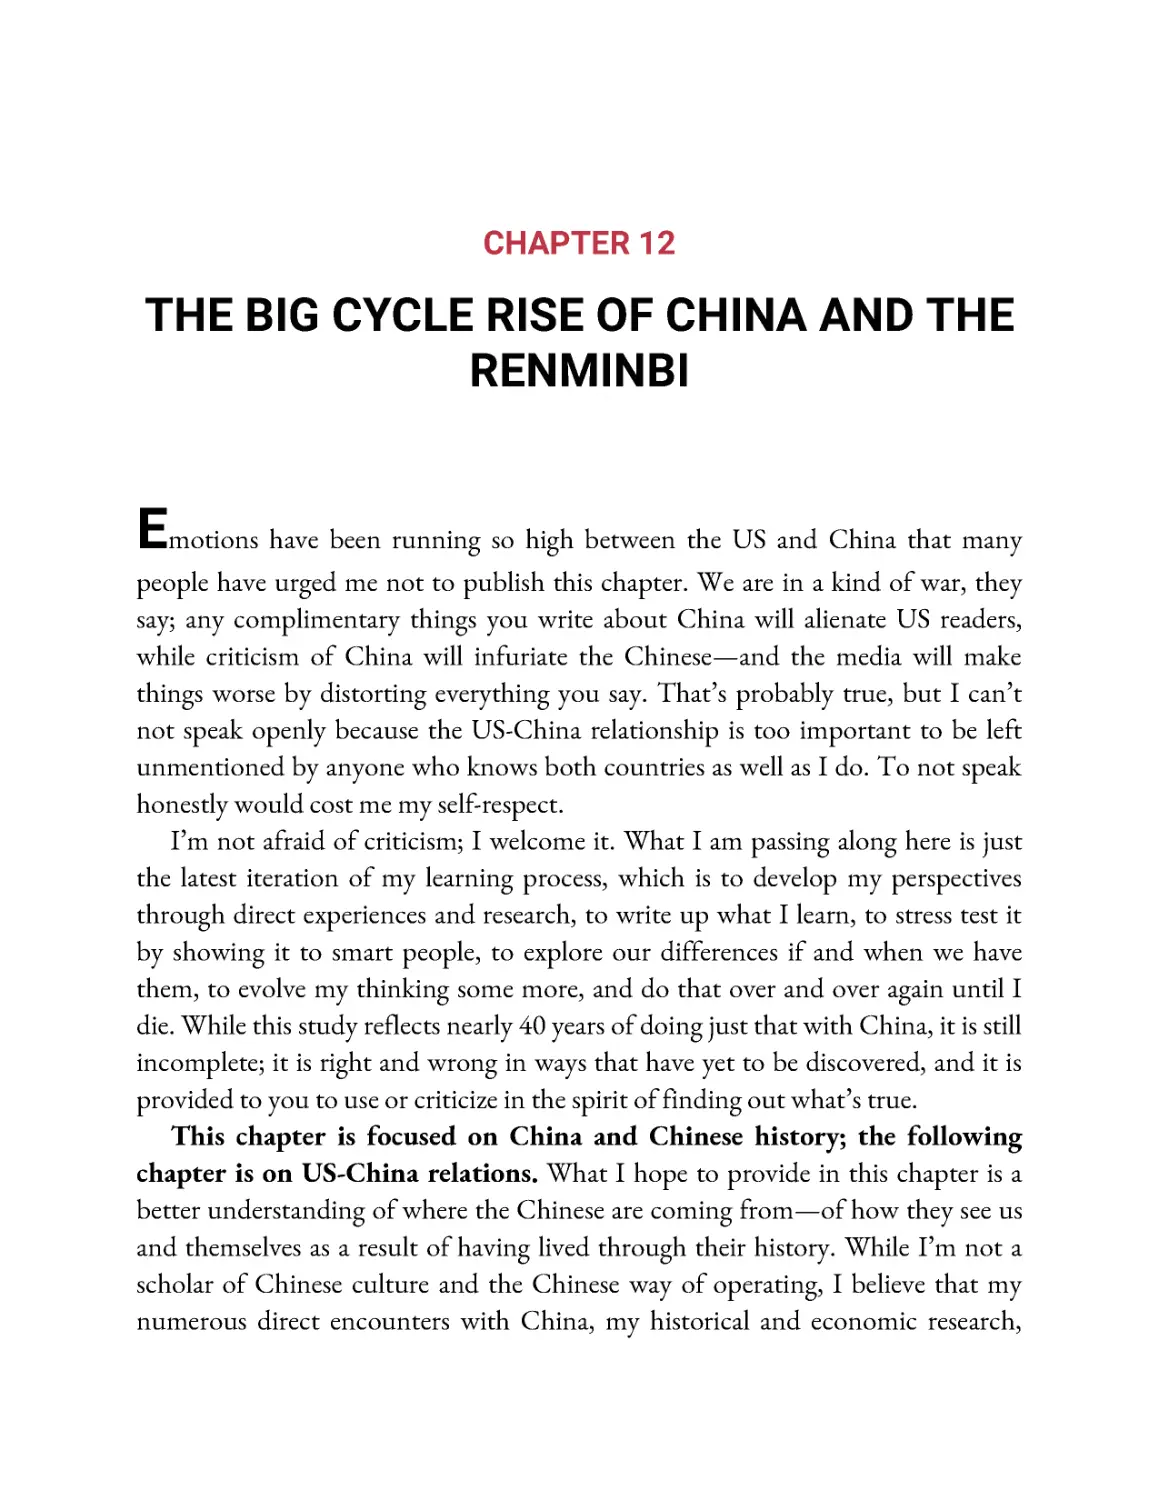 ﻿Chapter 12: The Big Cycle Rise of China and the Renminb